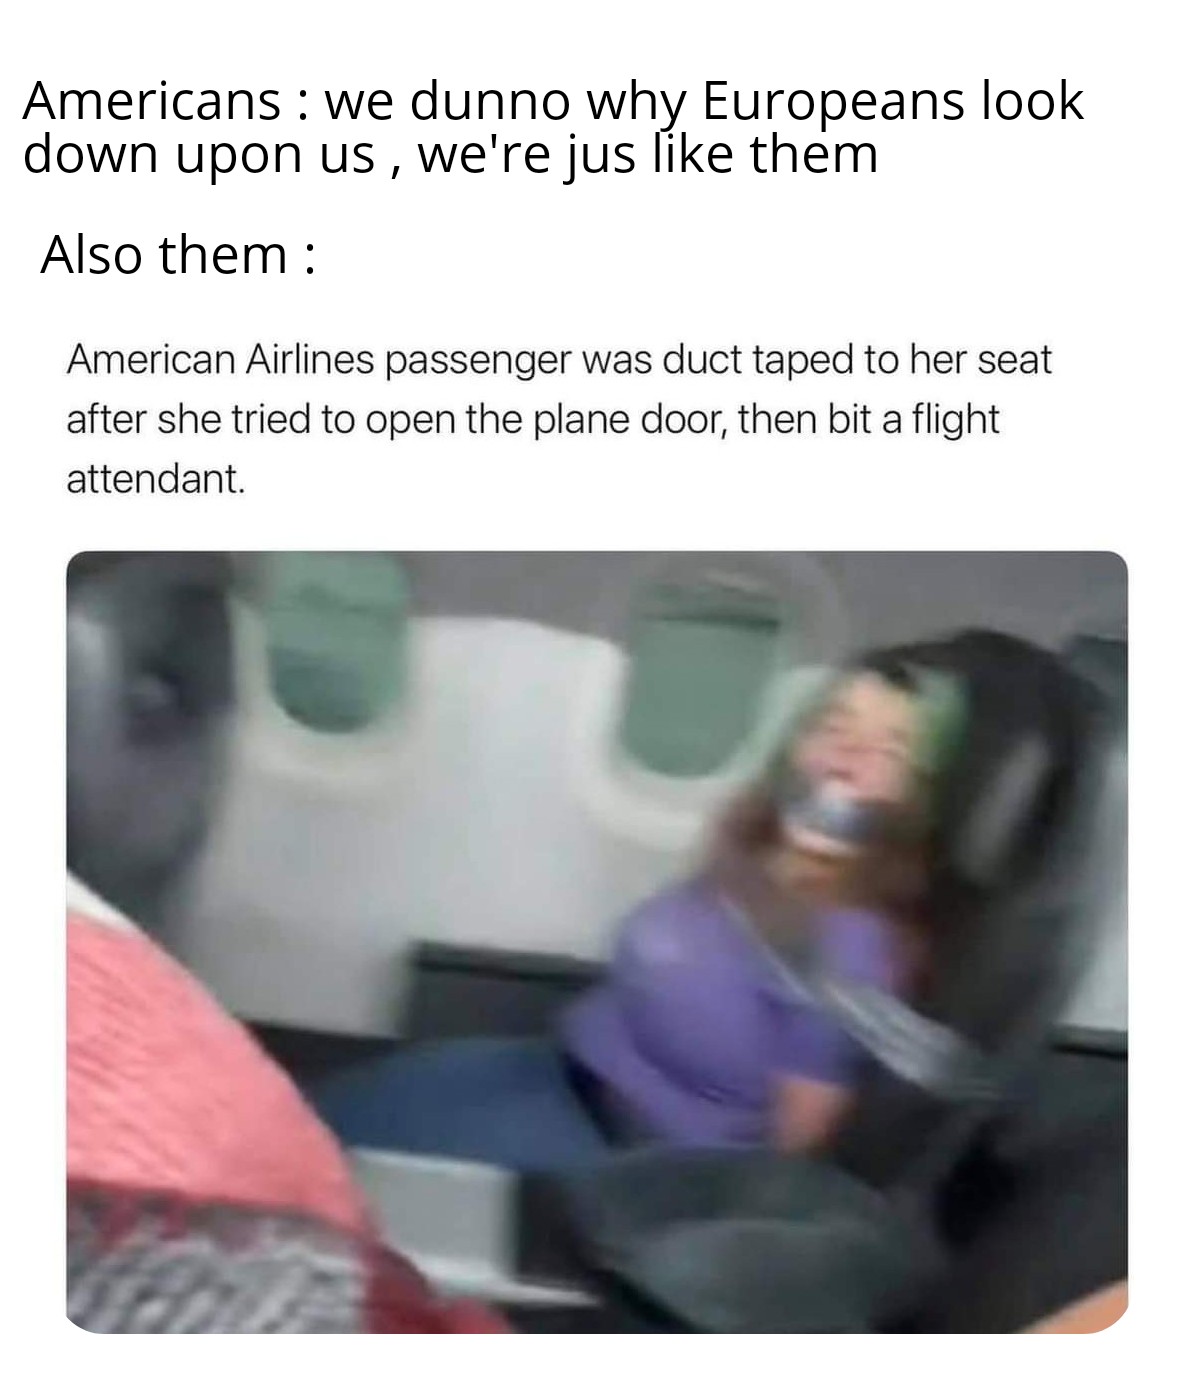 dank memes - woman duct taped on flight - Americans we dunno why Europeans look down upon us, we're jus them 1 Also them American Airlines passenger was duct taped to her seat after she tried to open the plane door, then bit a flight attendant.